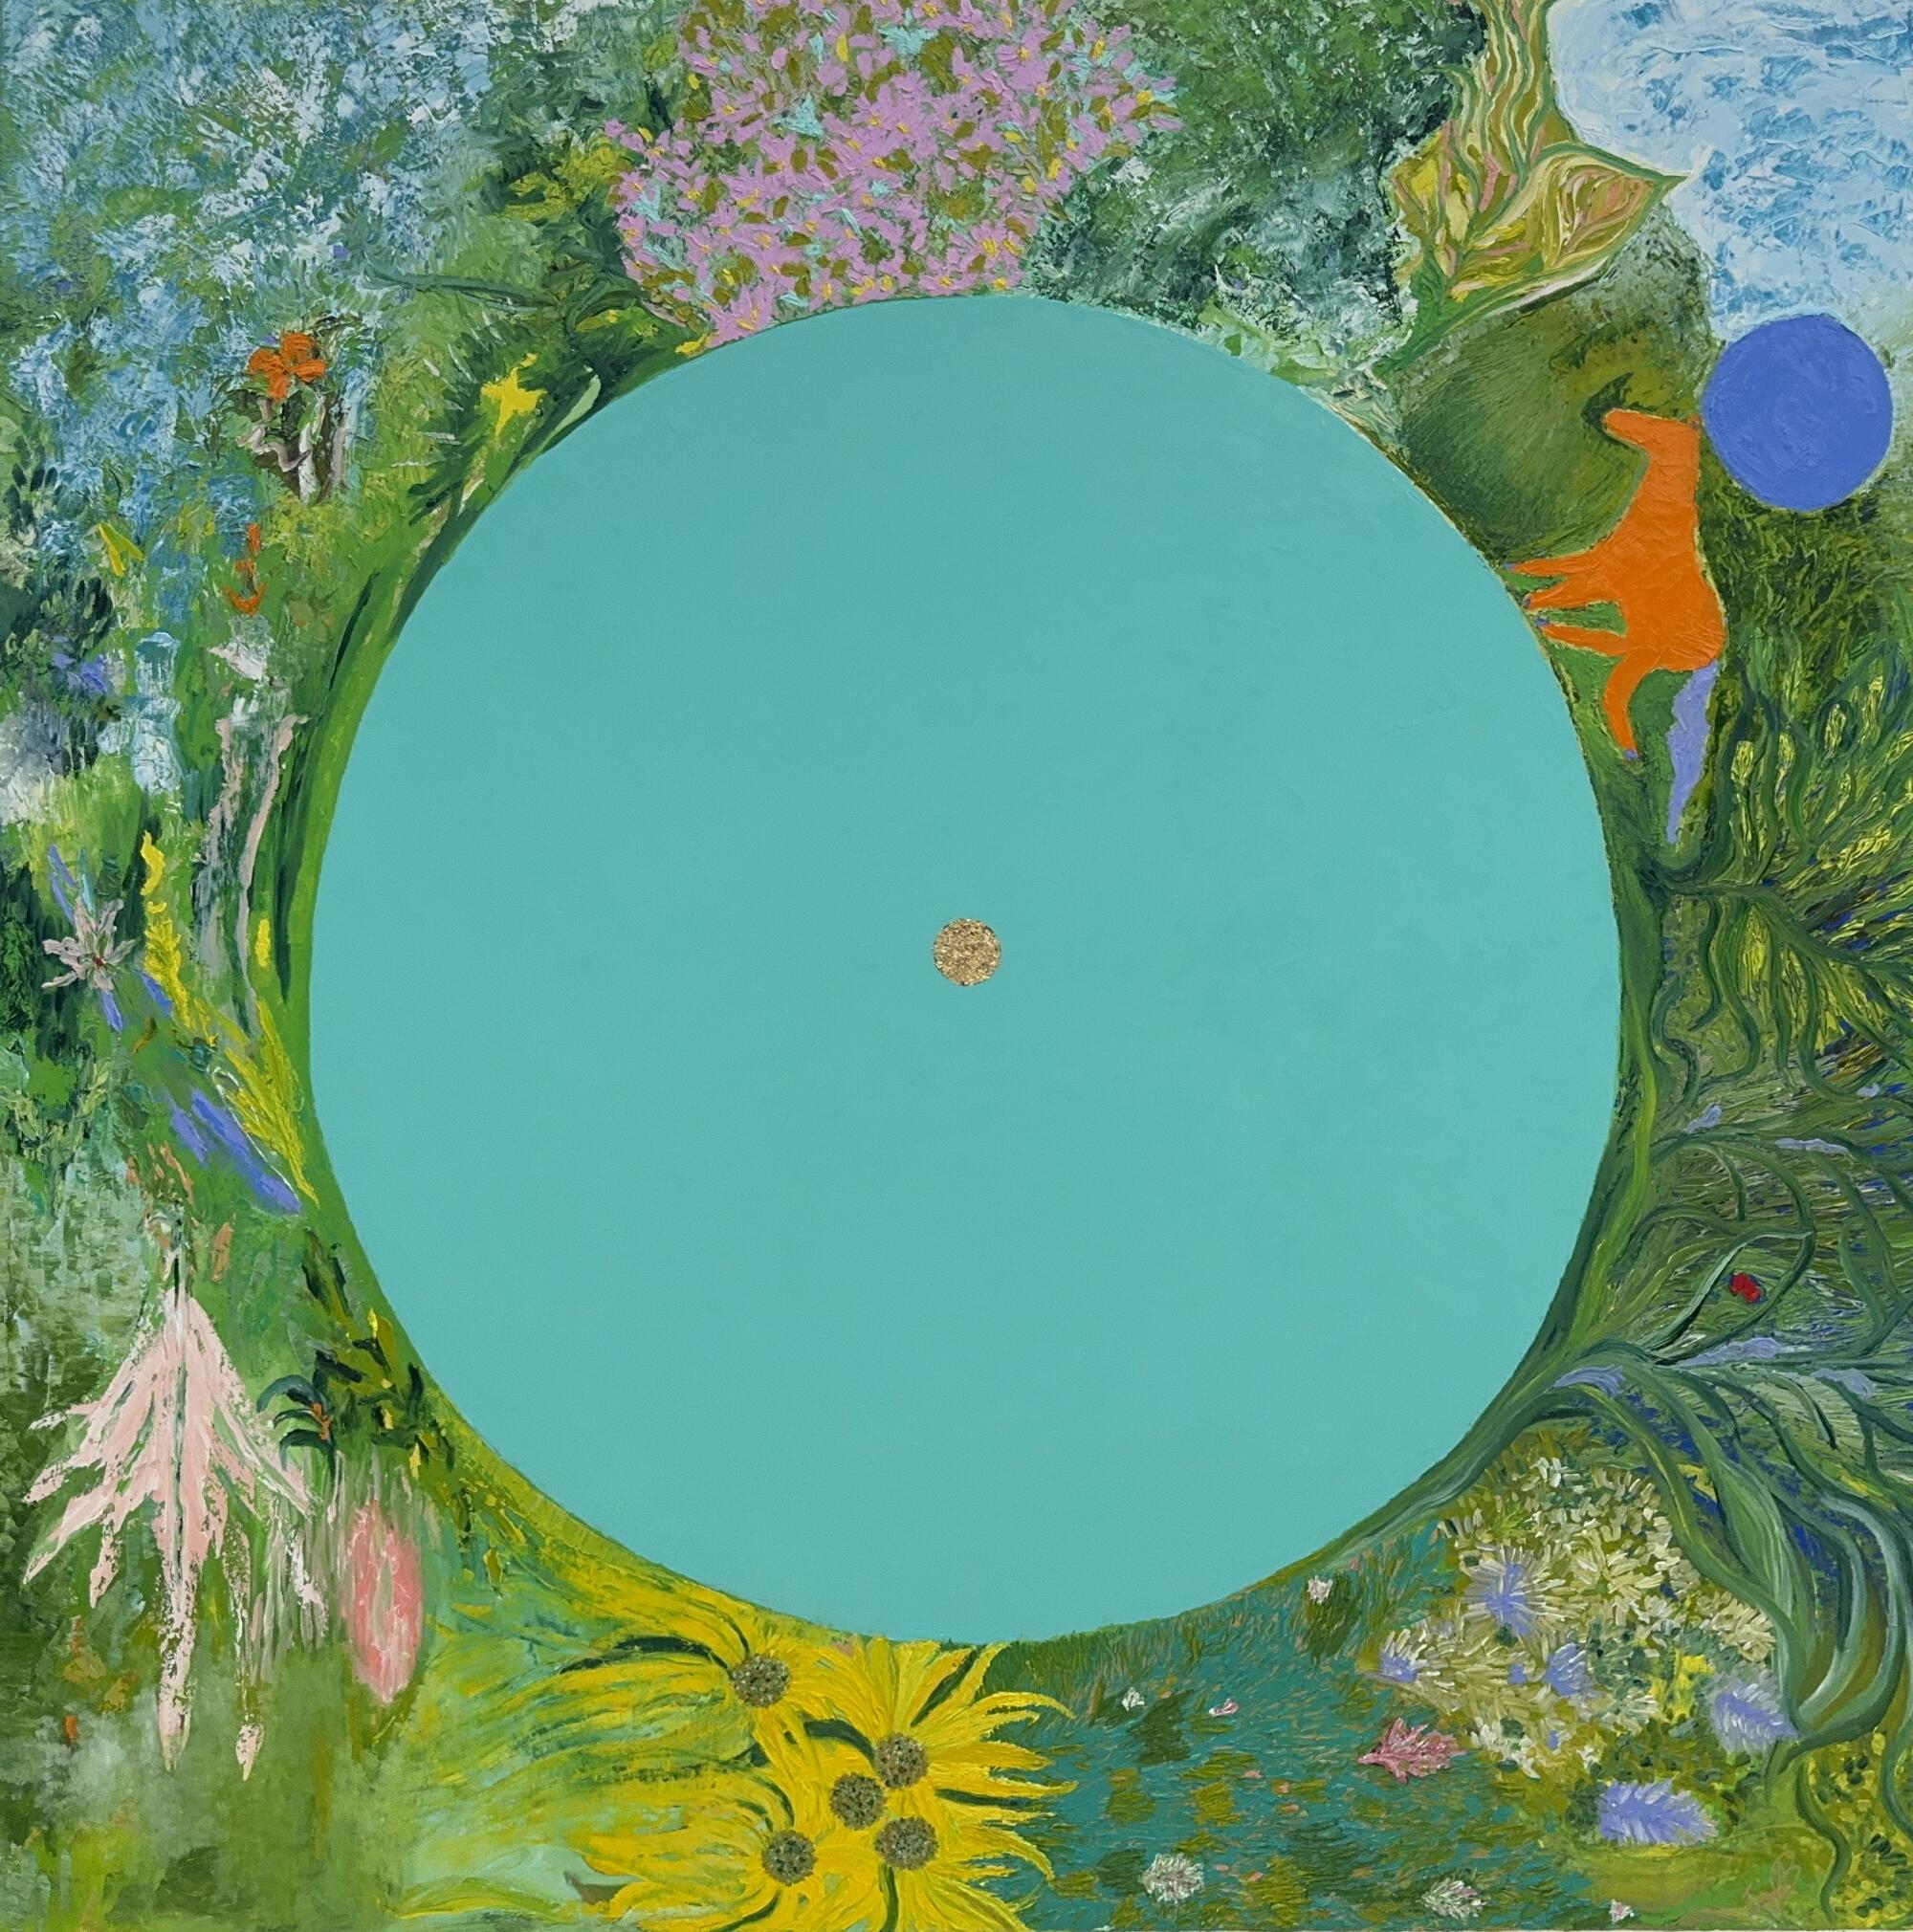 A turquoise circle surrounded by pink, yellow and blue flowers, and lots of greenery. 